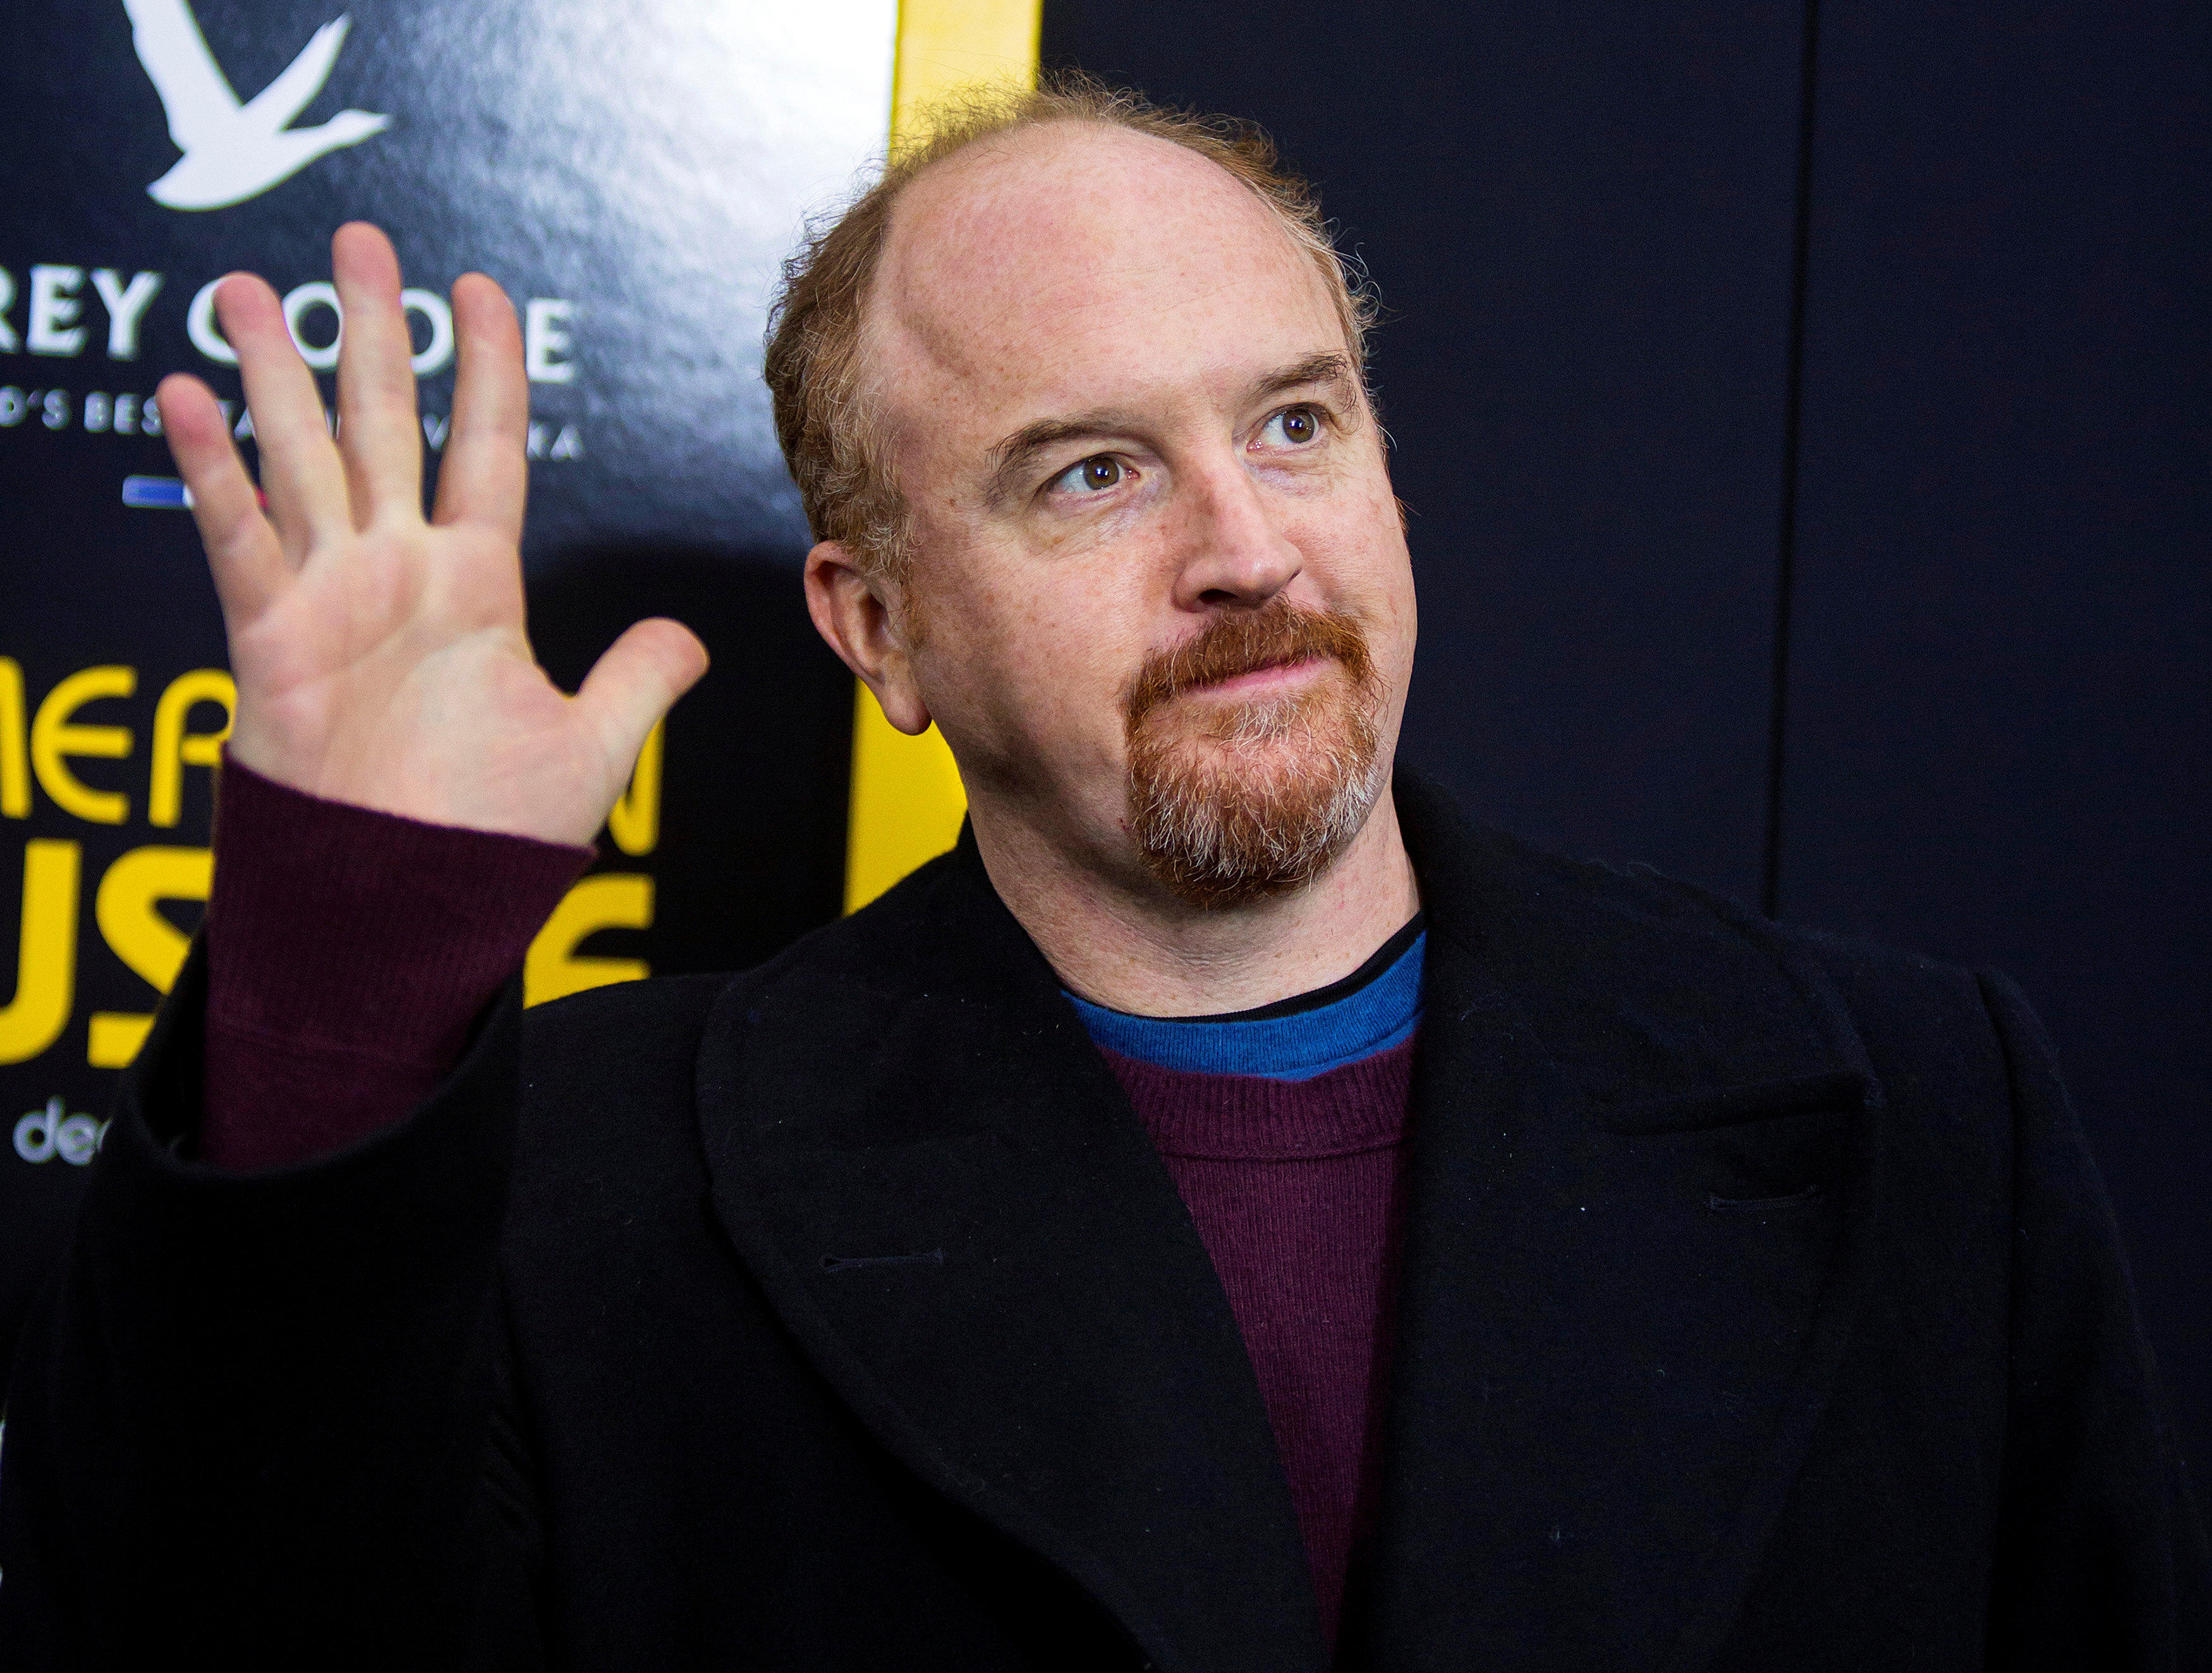 Louis C.K. says in statement sexual misconduct stories "are true" CBS News